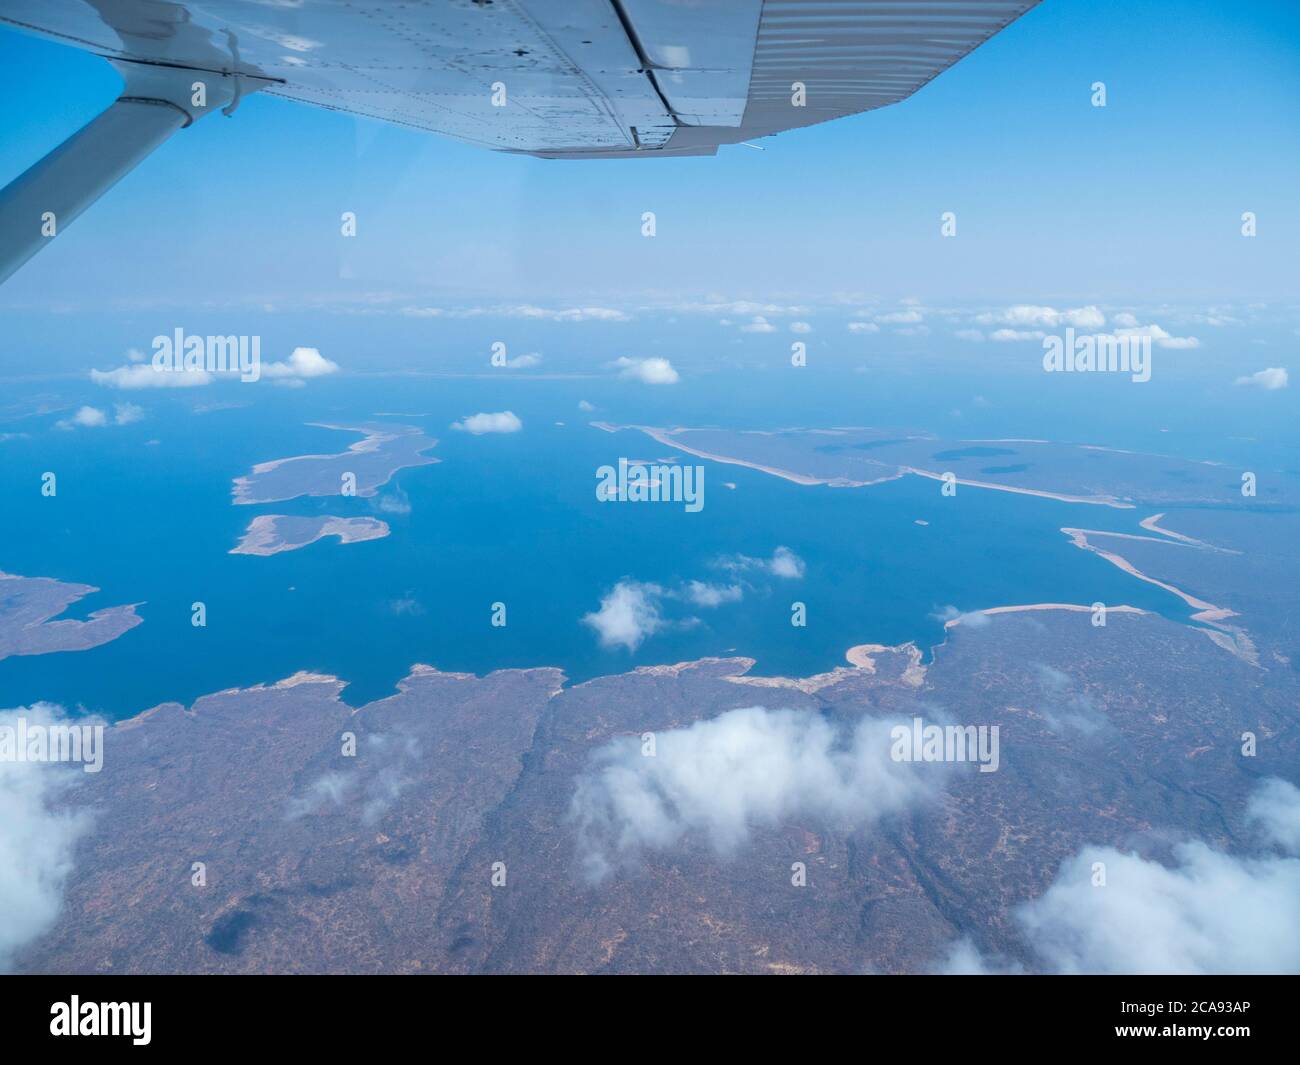 Aerial view of Lake Kariba, the world's largest man-made lake and reservoir by volume, Zimbabwe, Africa Stock Photo